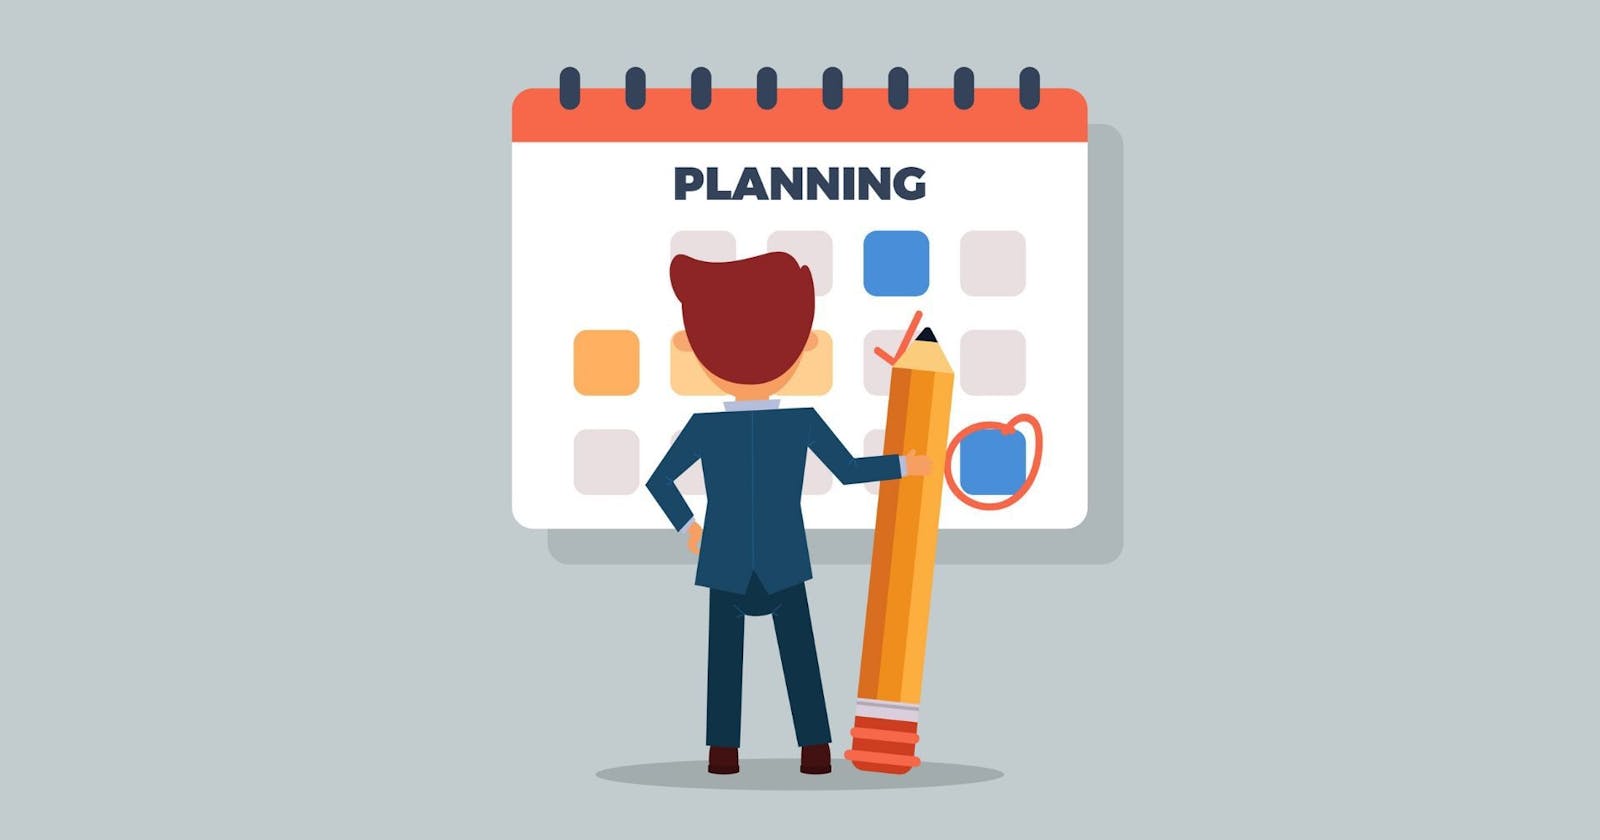 Plan or not to plan a project!